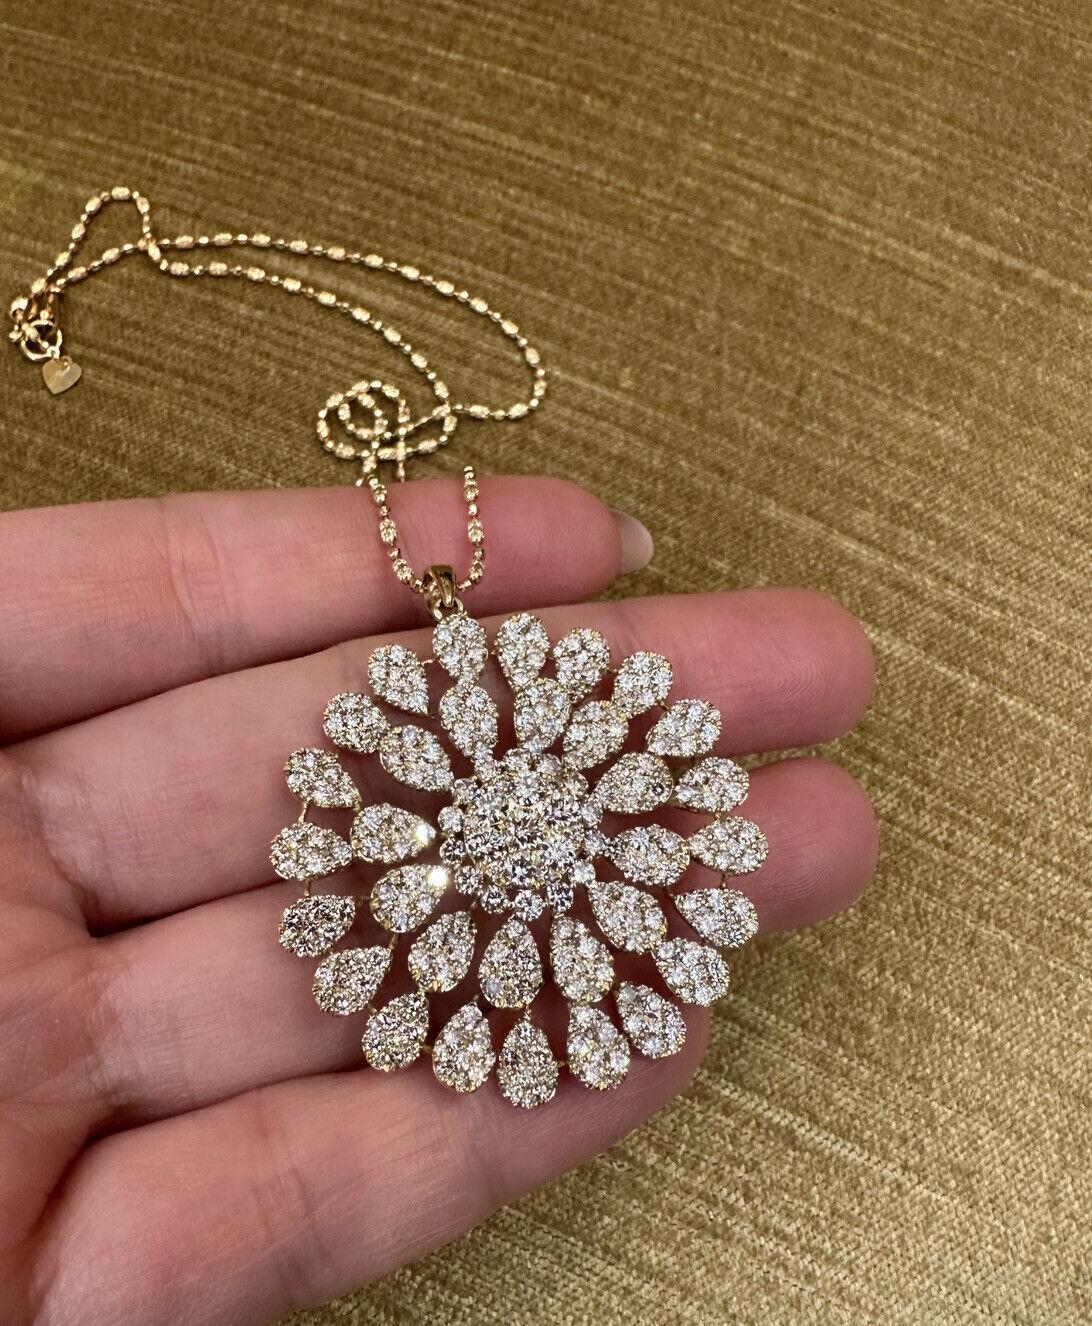 6.50 carat Pave Diamond Flower Medallion Pendant Necklace 18k Yellow Gold In Excellent Condition For Sale In La Jolla, CA